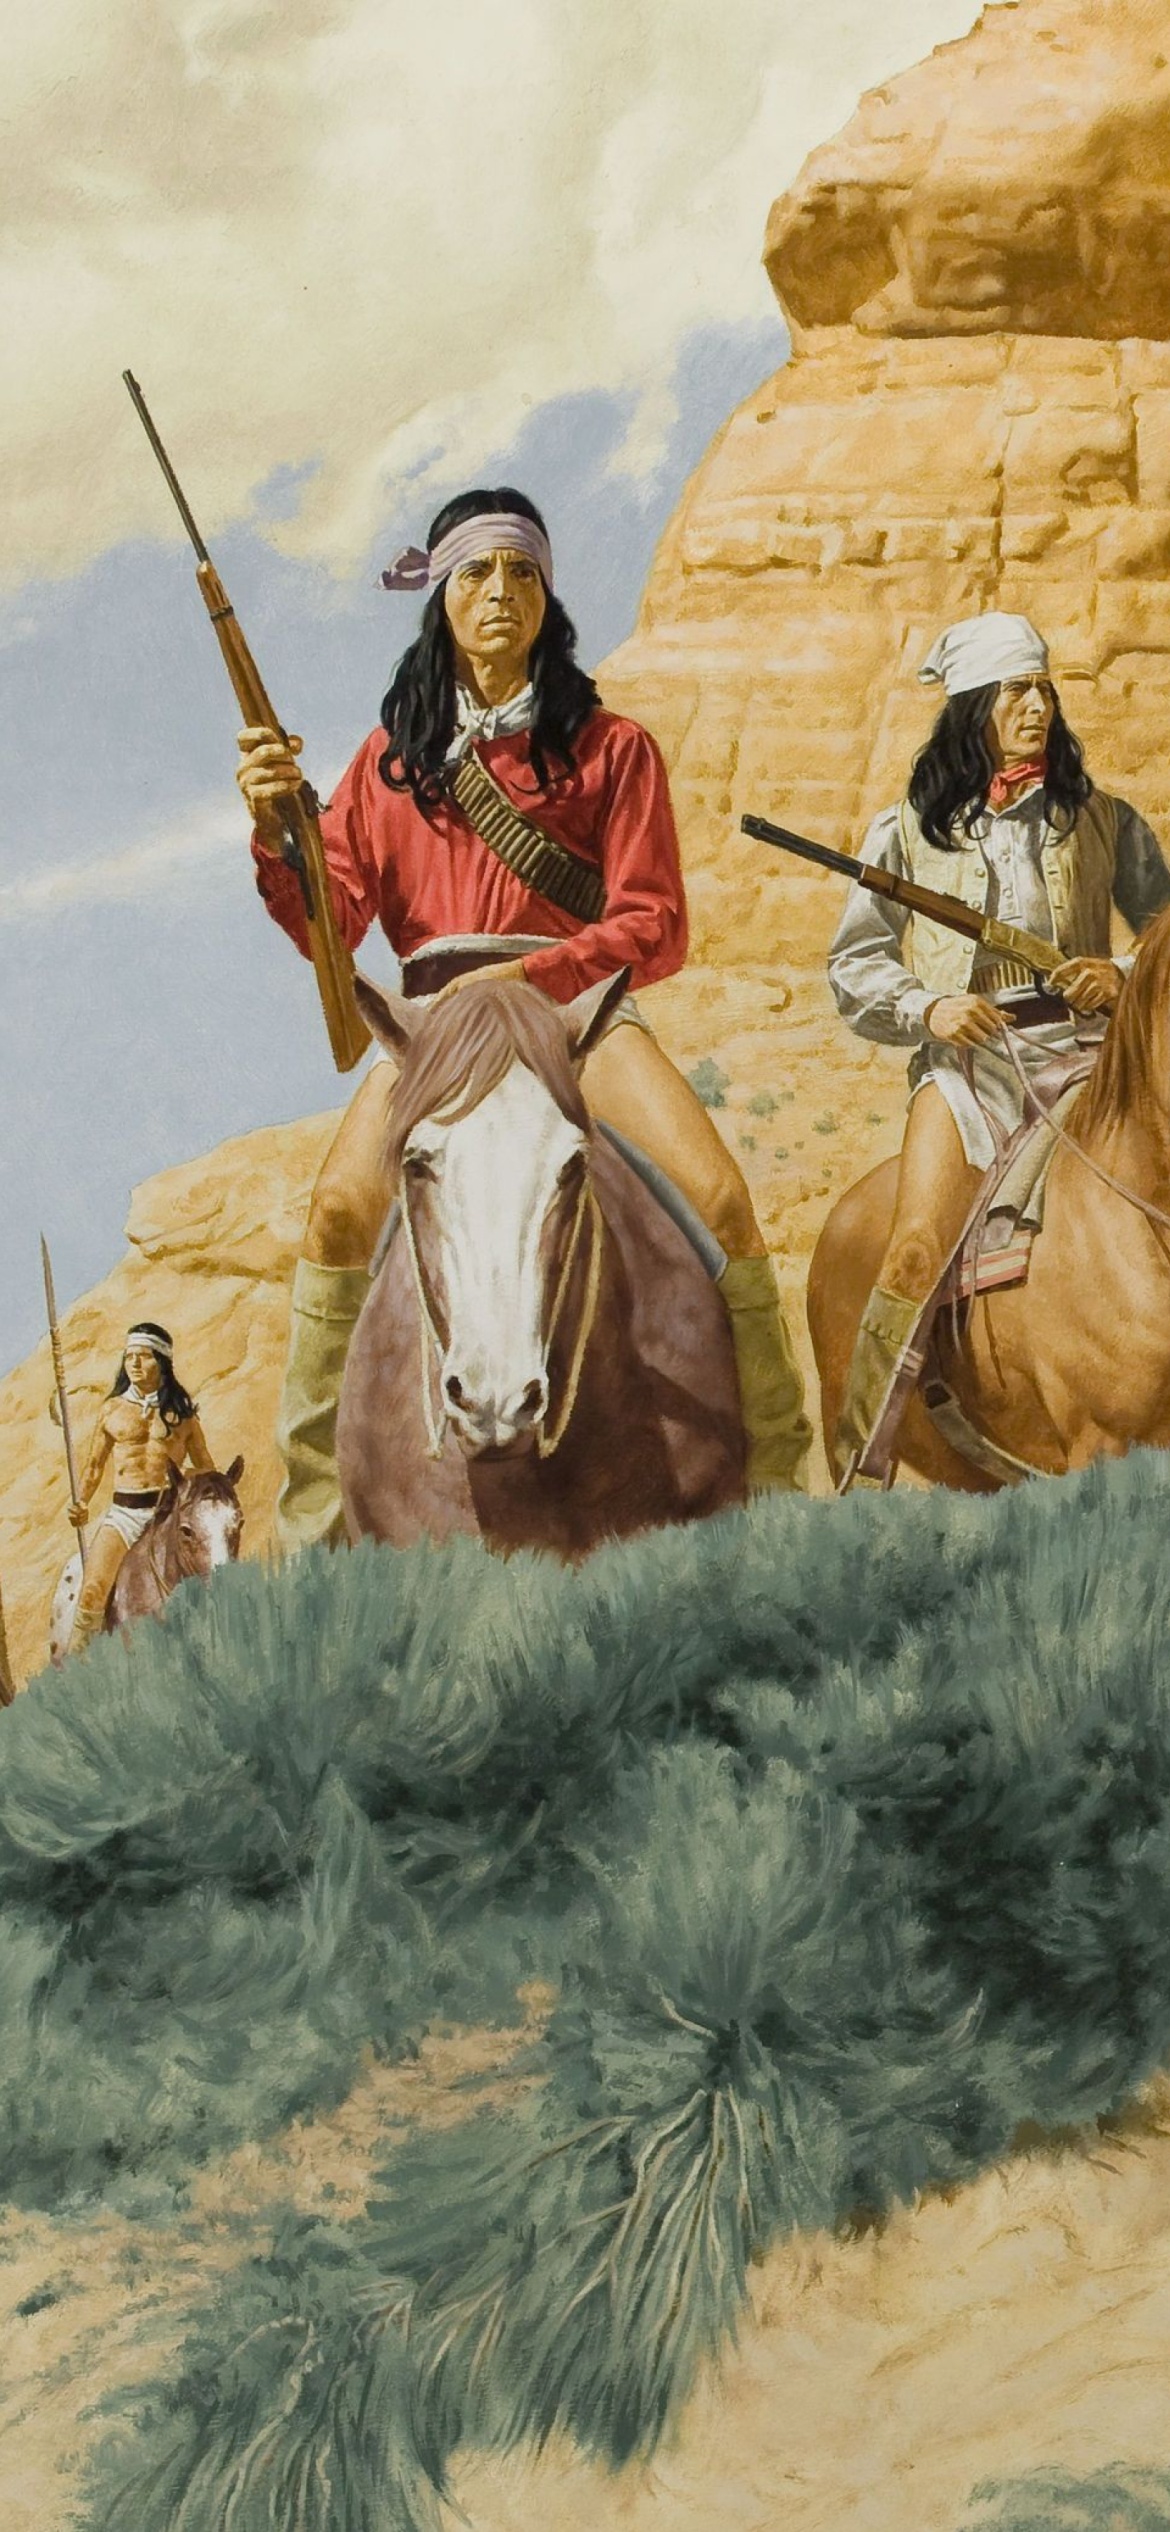 Native American Indians Riders wallpaper 1170x2532